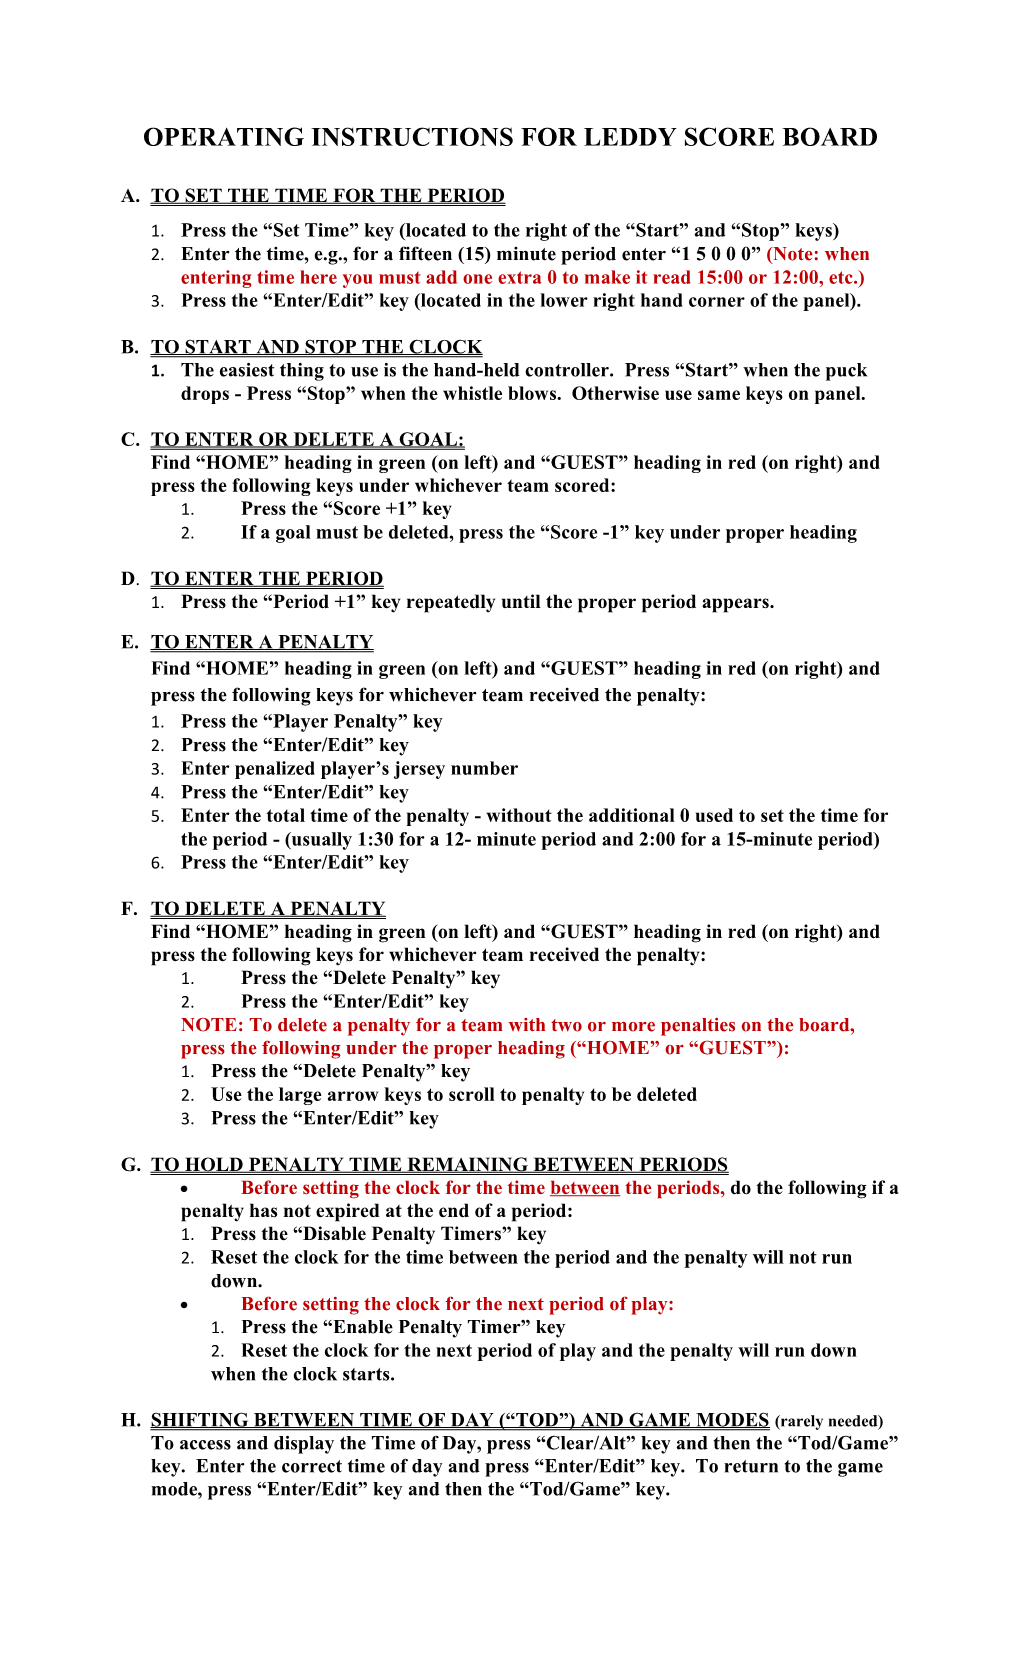 Operating Instructions for Leddy Score Board